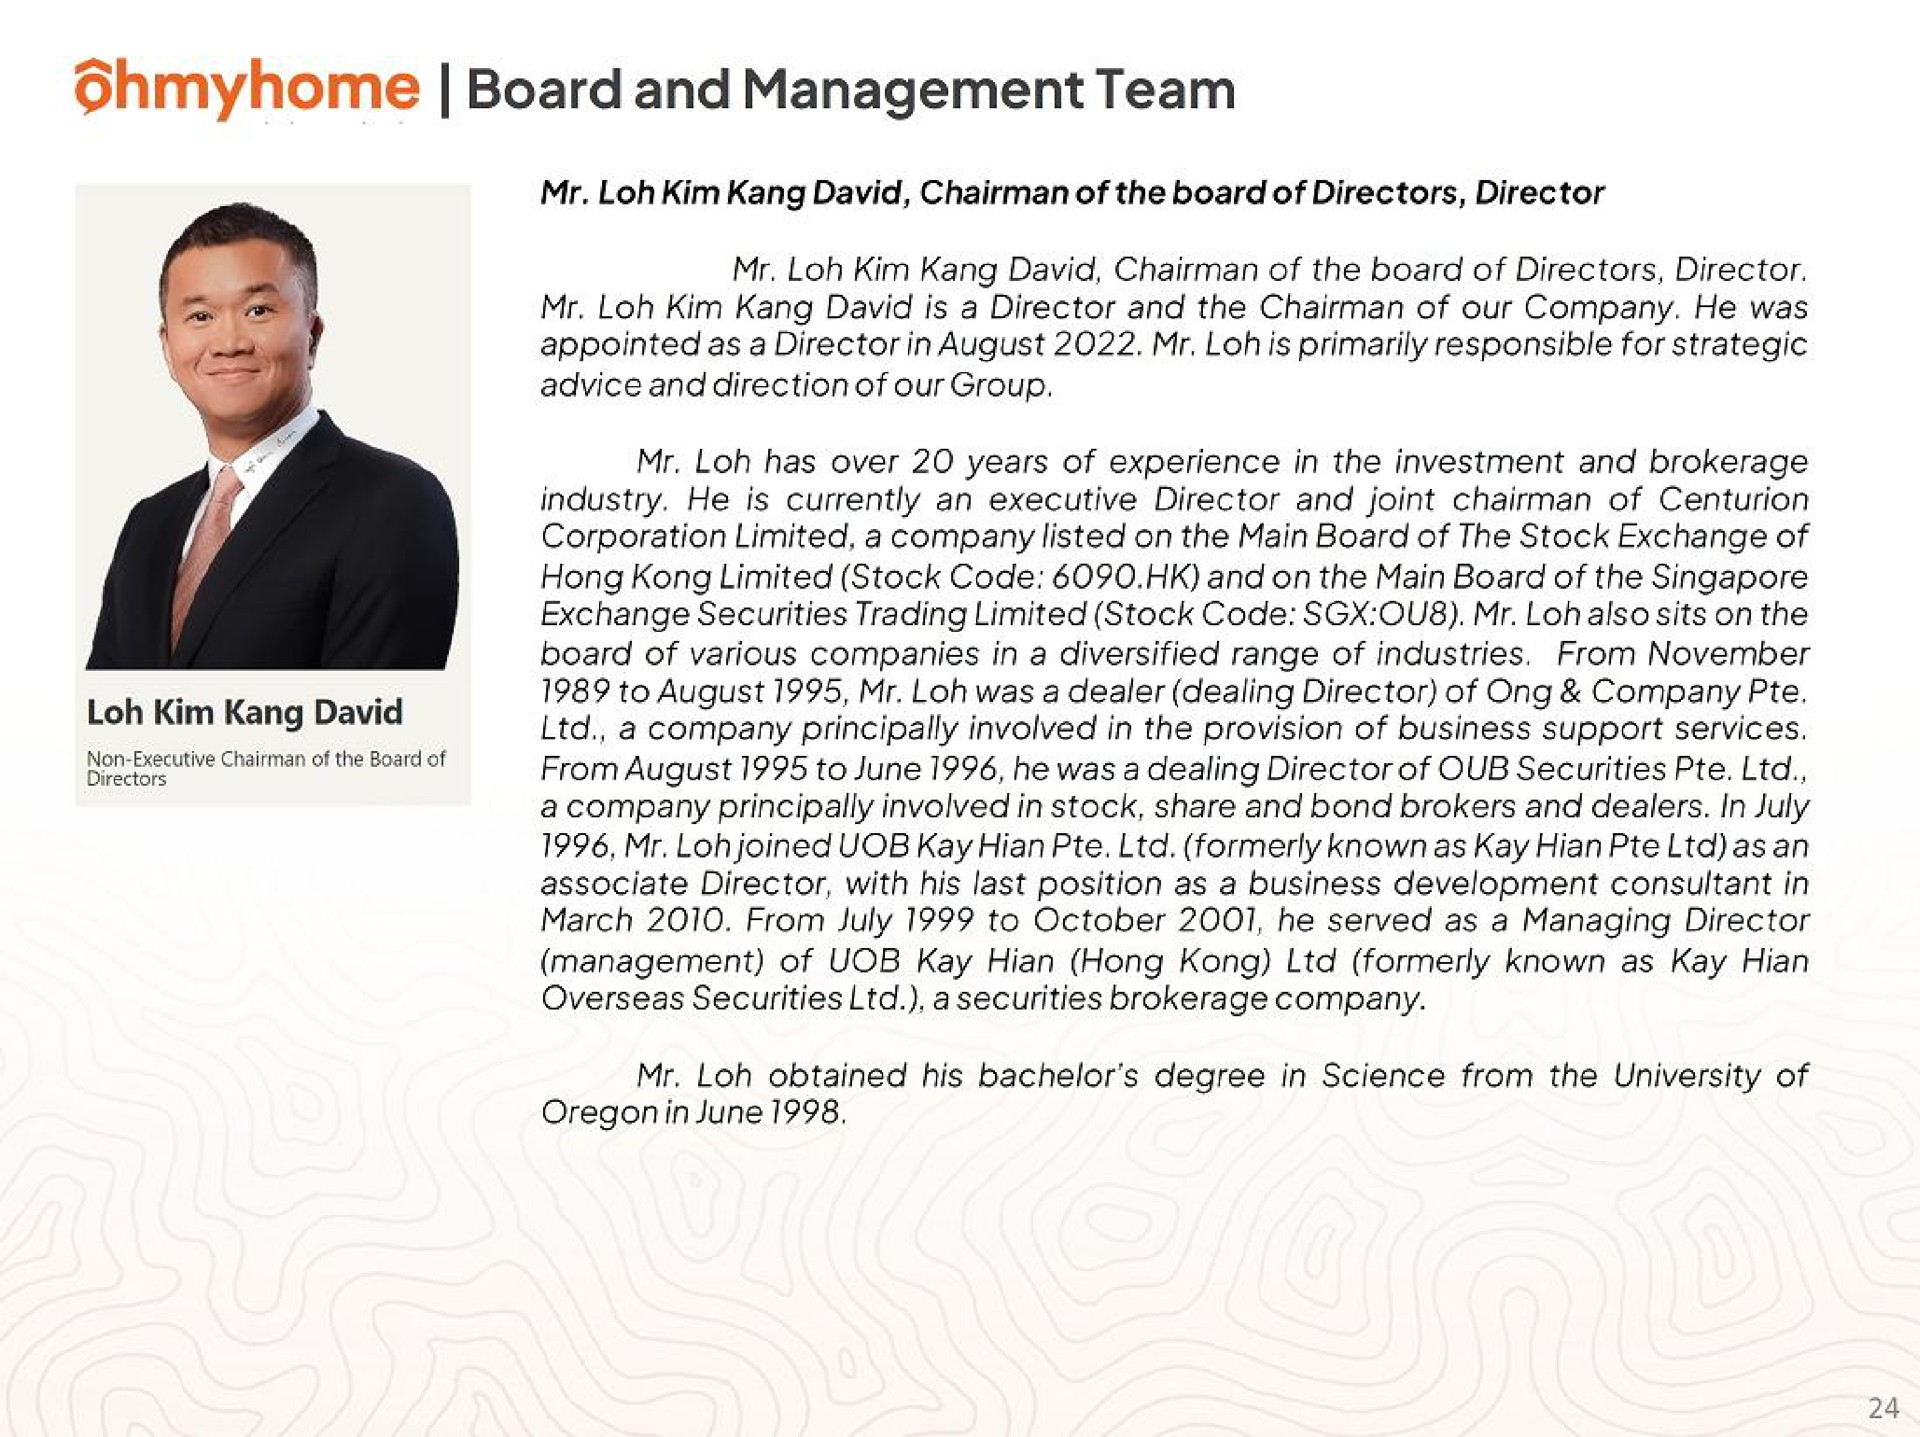 board and management team | Ohmyhome